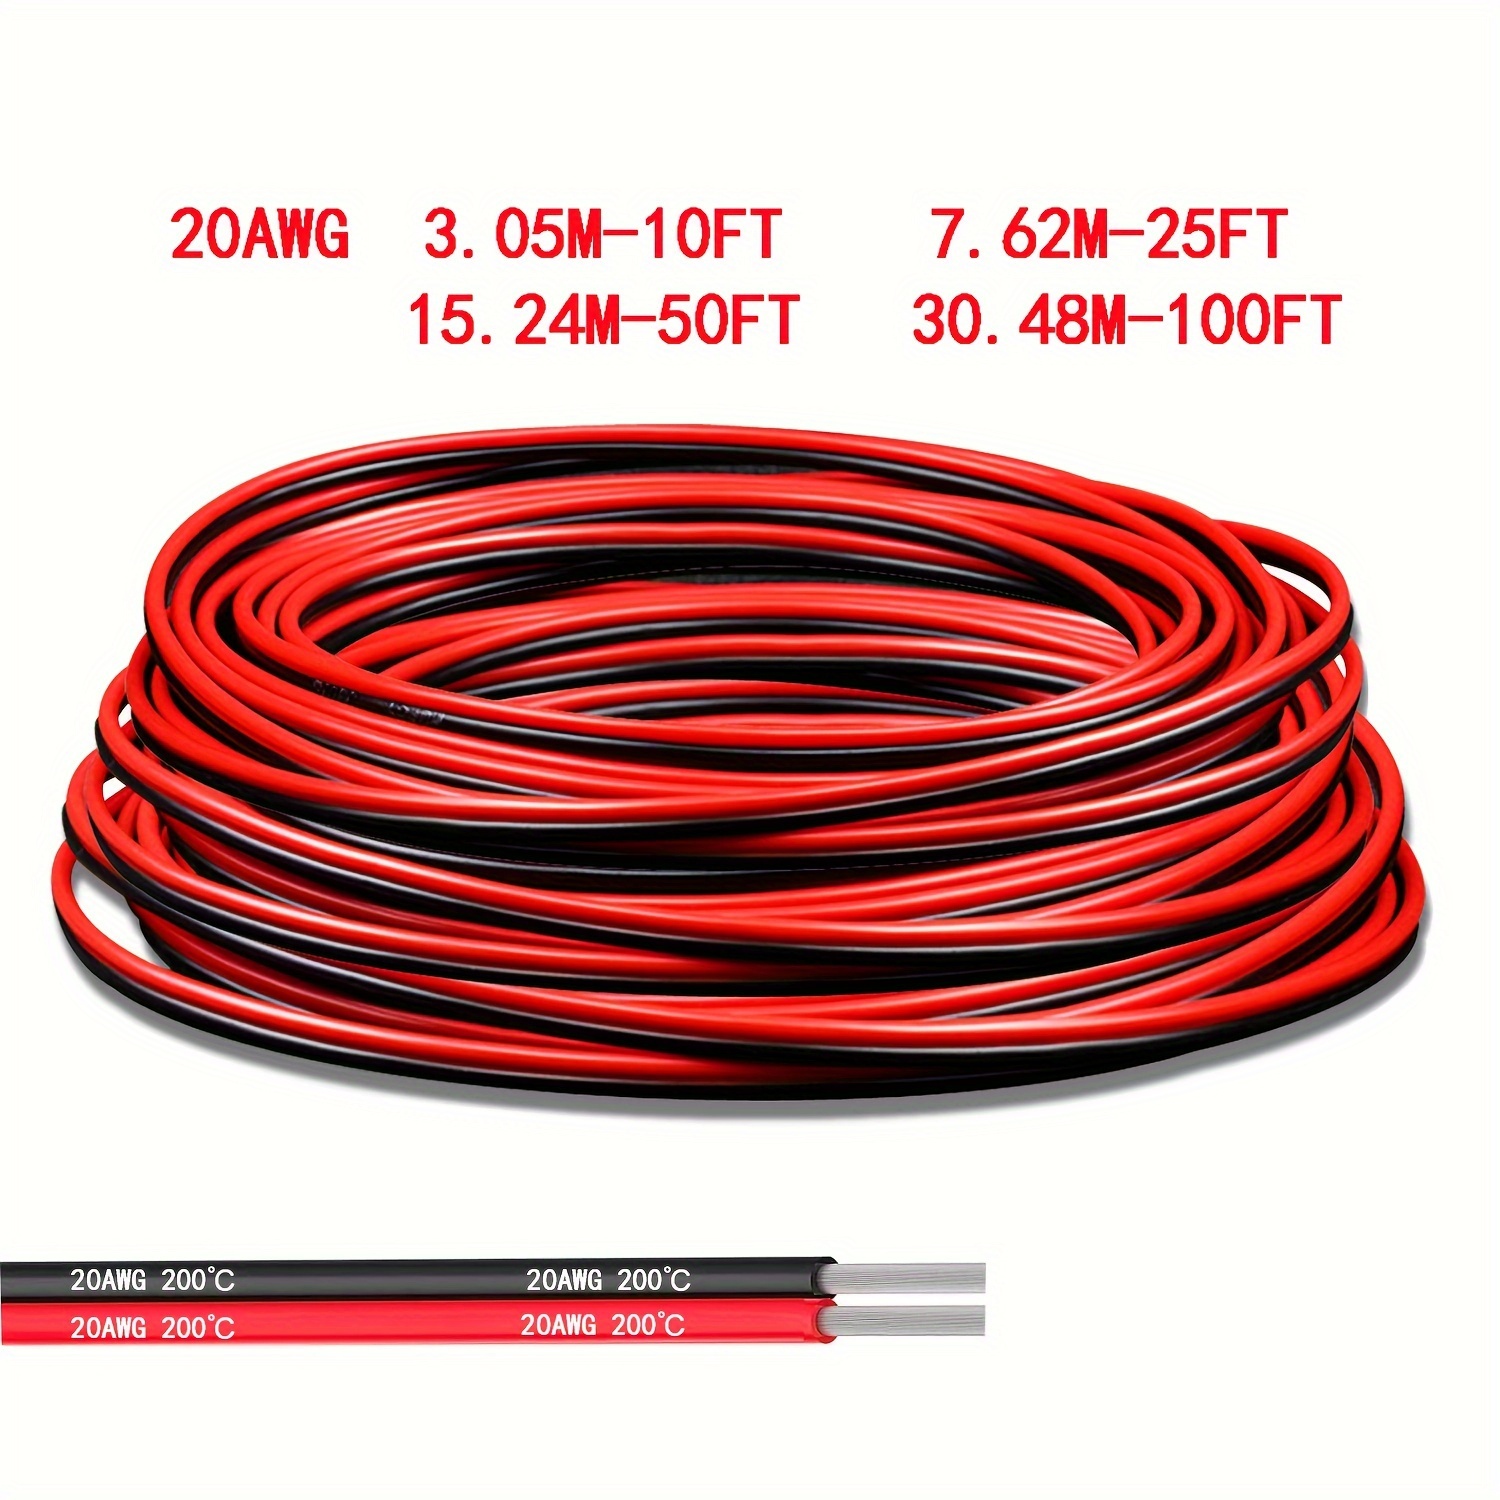 16 AWG Stranded Electrical Wire 16 Gauge Tinned Copper Wires Flexible  Silicone Electric Hook Up Wire Kit OD:2.5mm, 5 Colors 13.1ft/4m Each